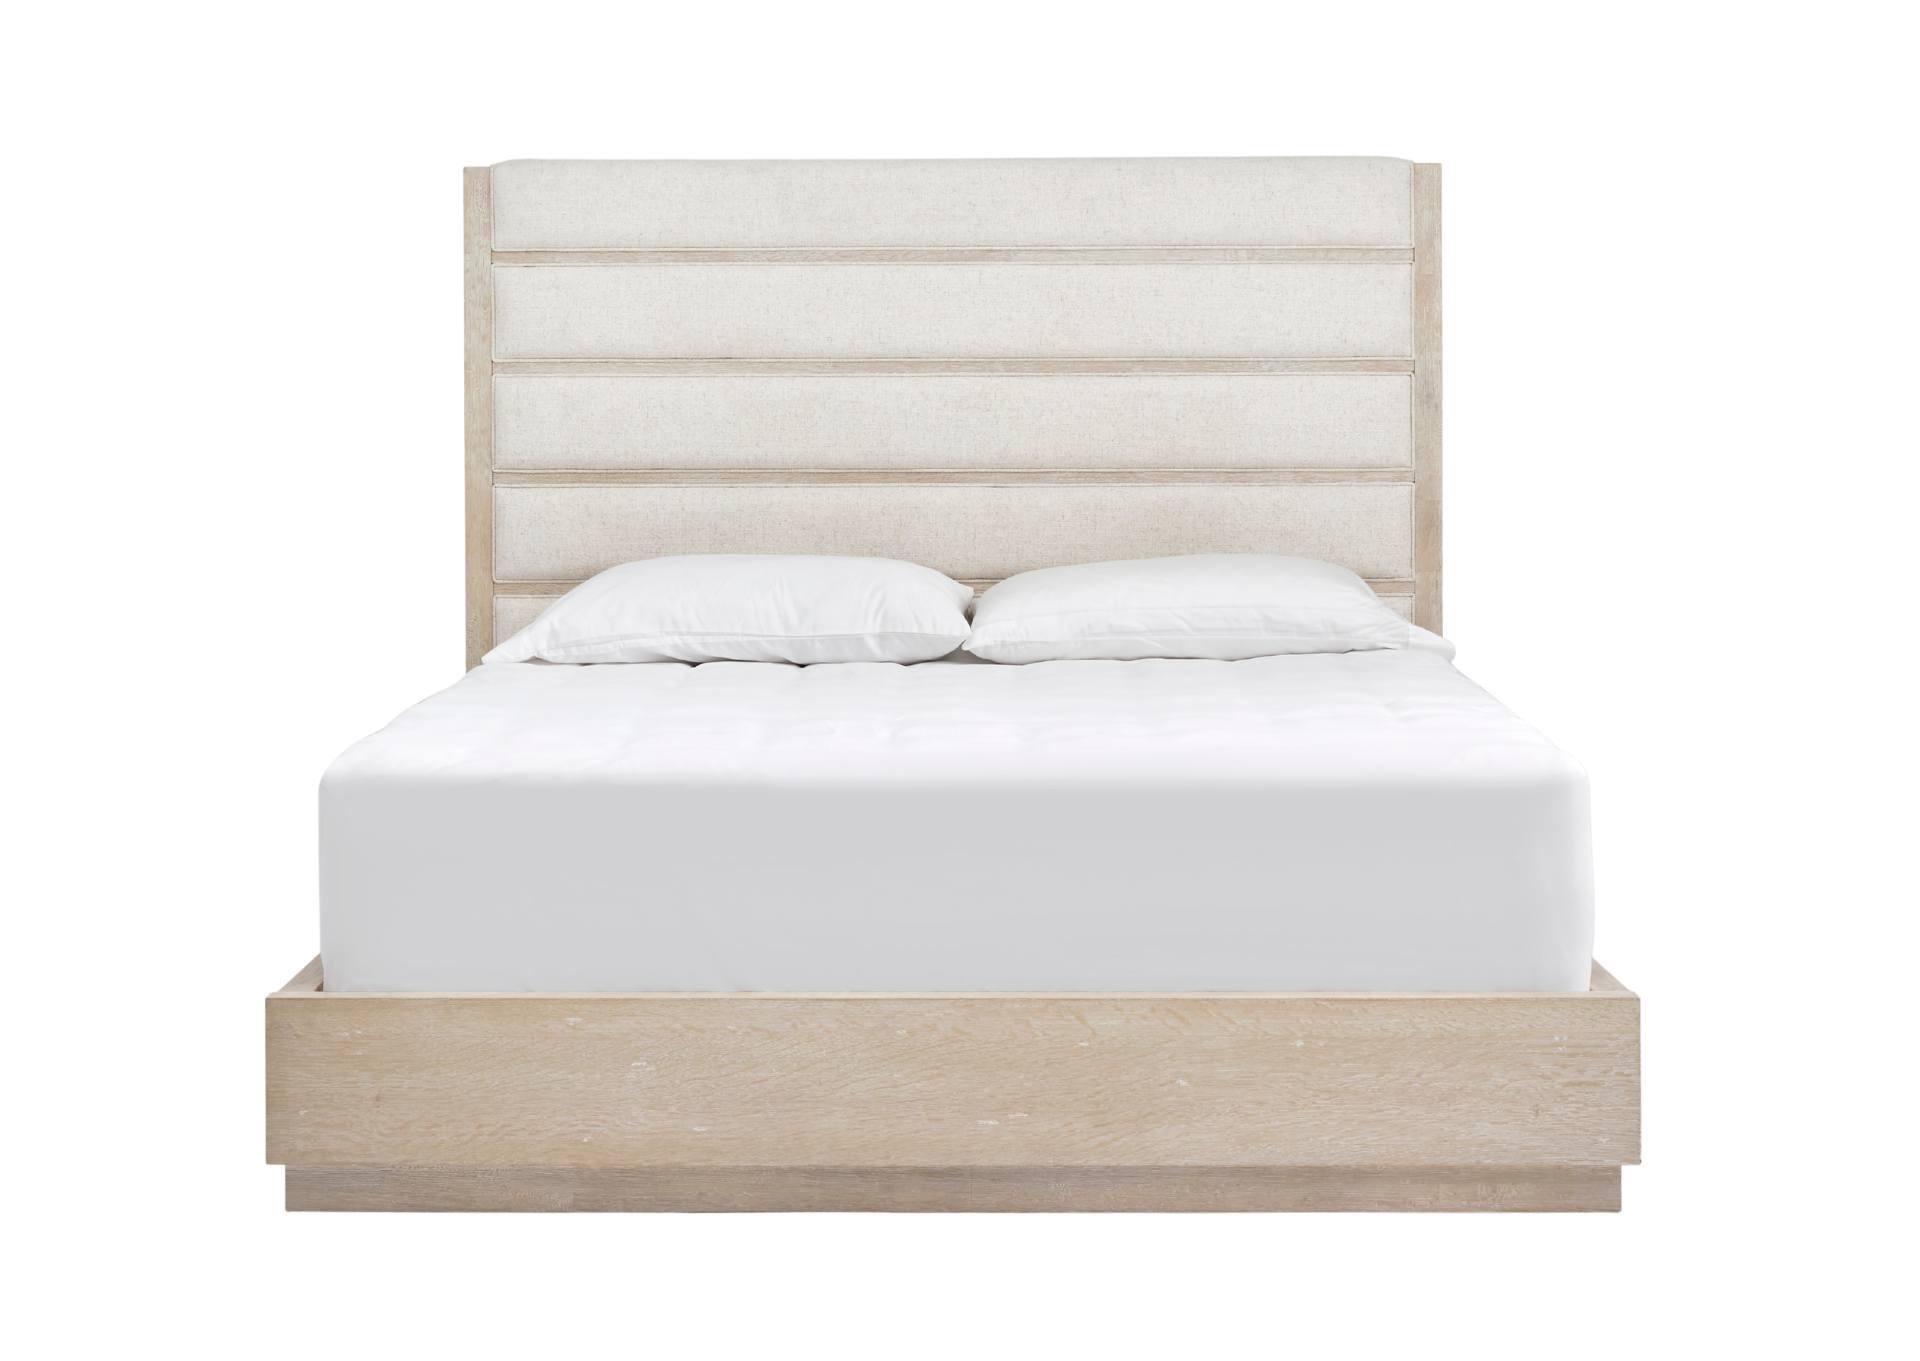 AMHERST WHITEWASH QUEEN UPHOLSTERED BED